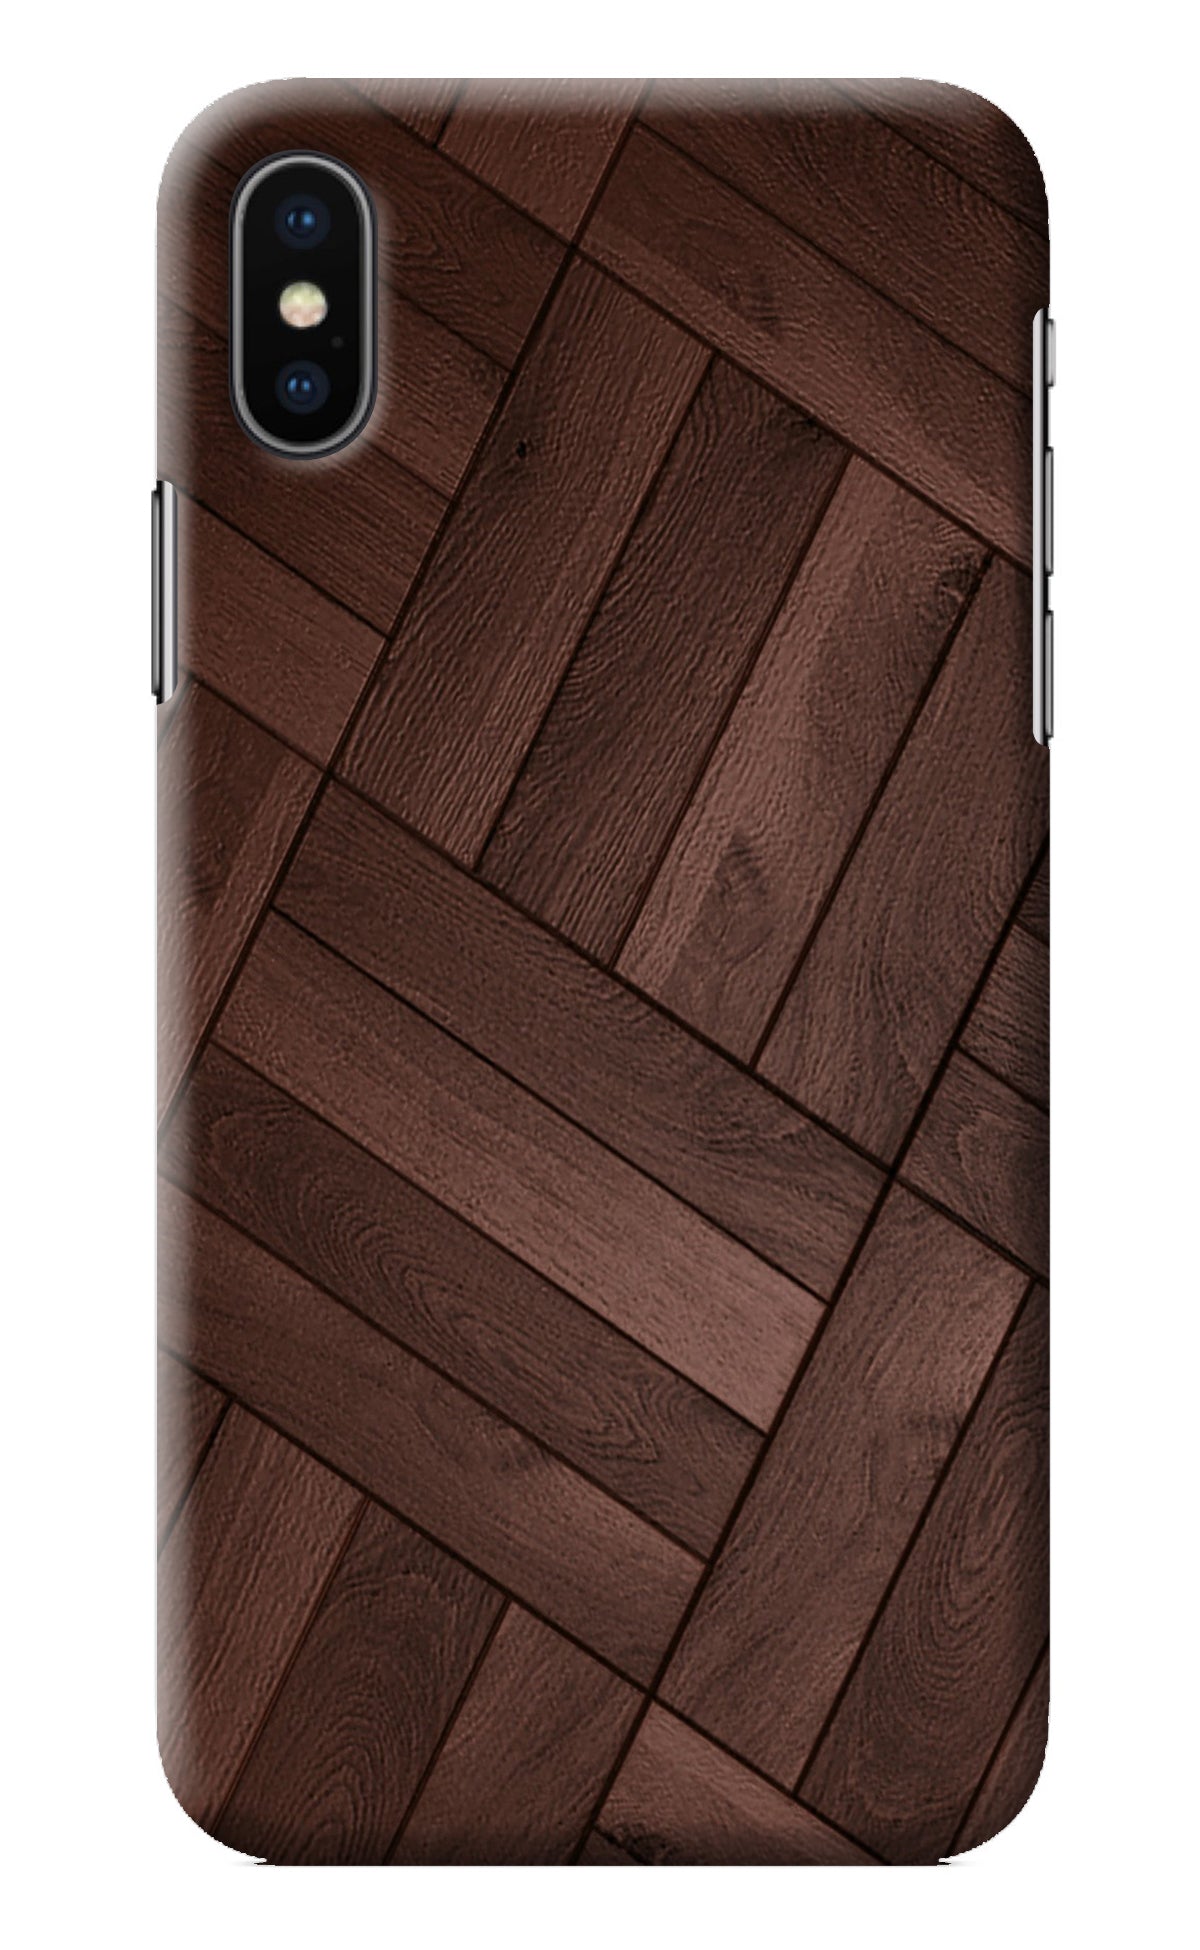 Wooden Texture Design iPhone X Back Cover